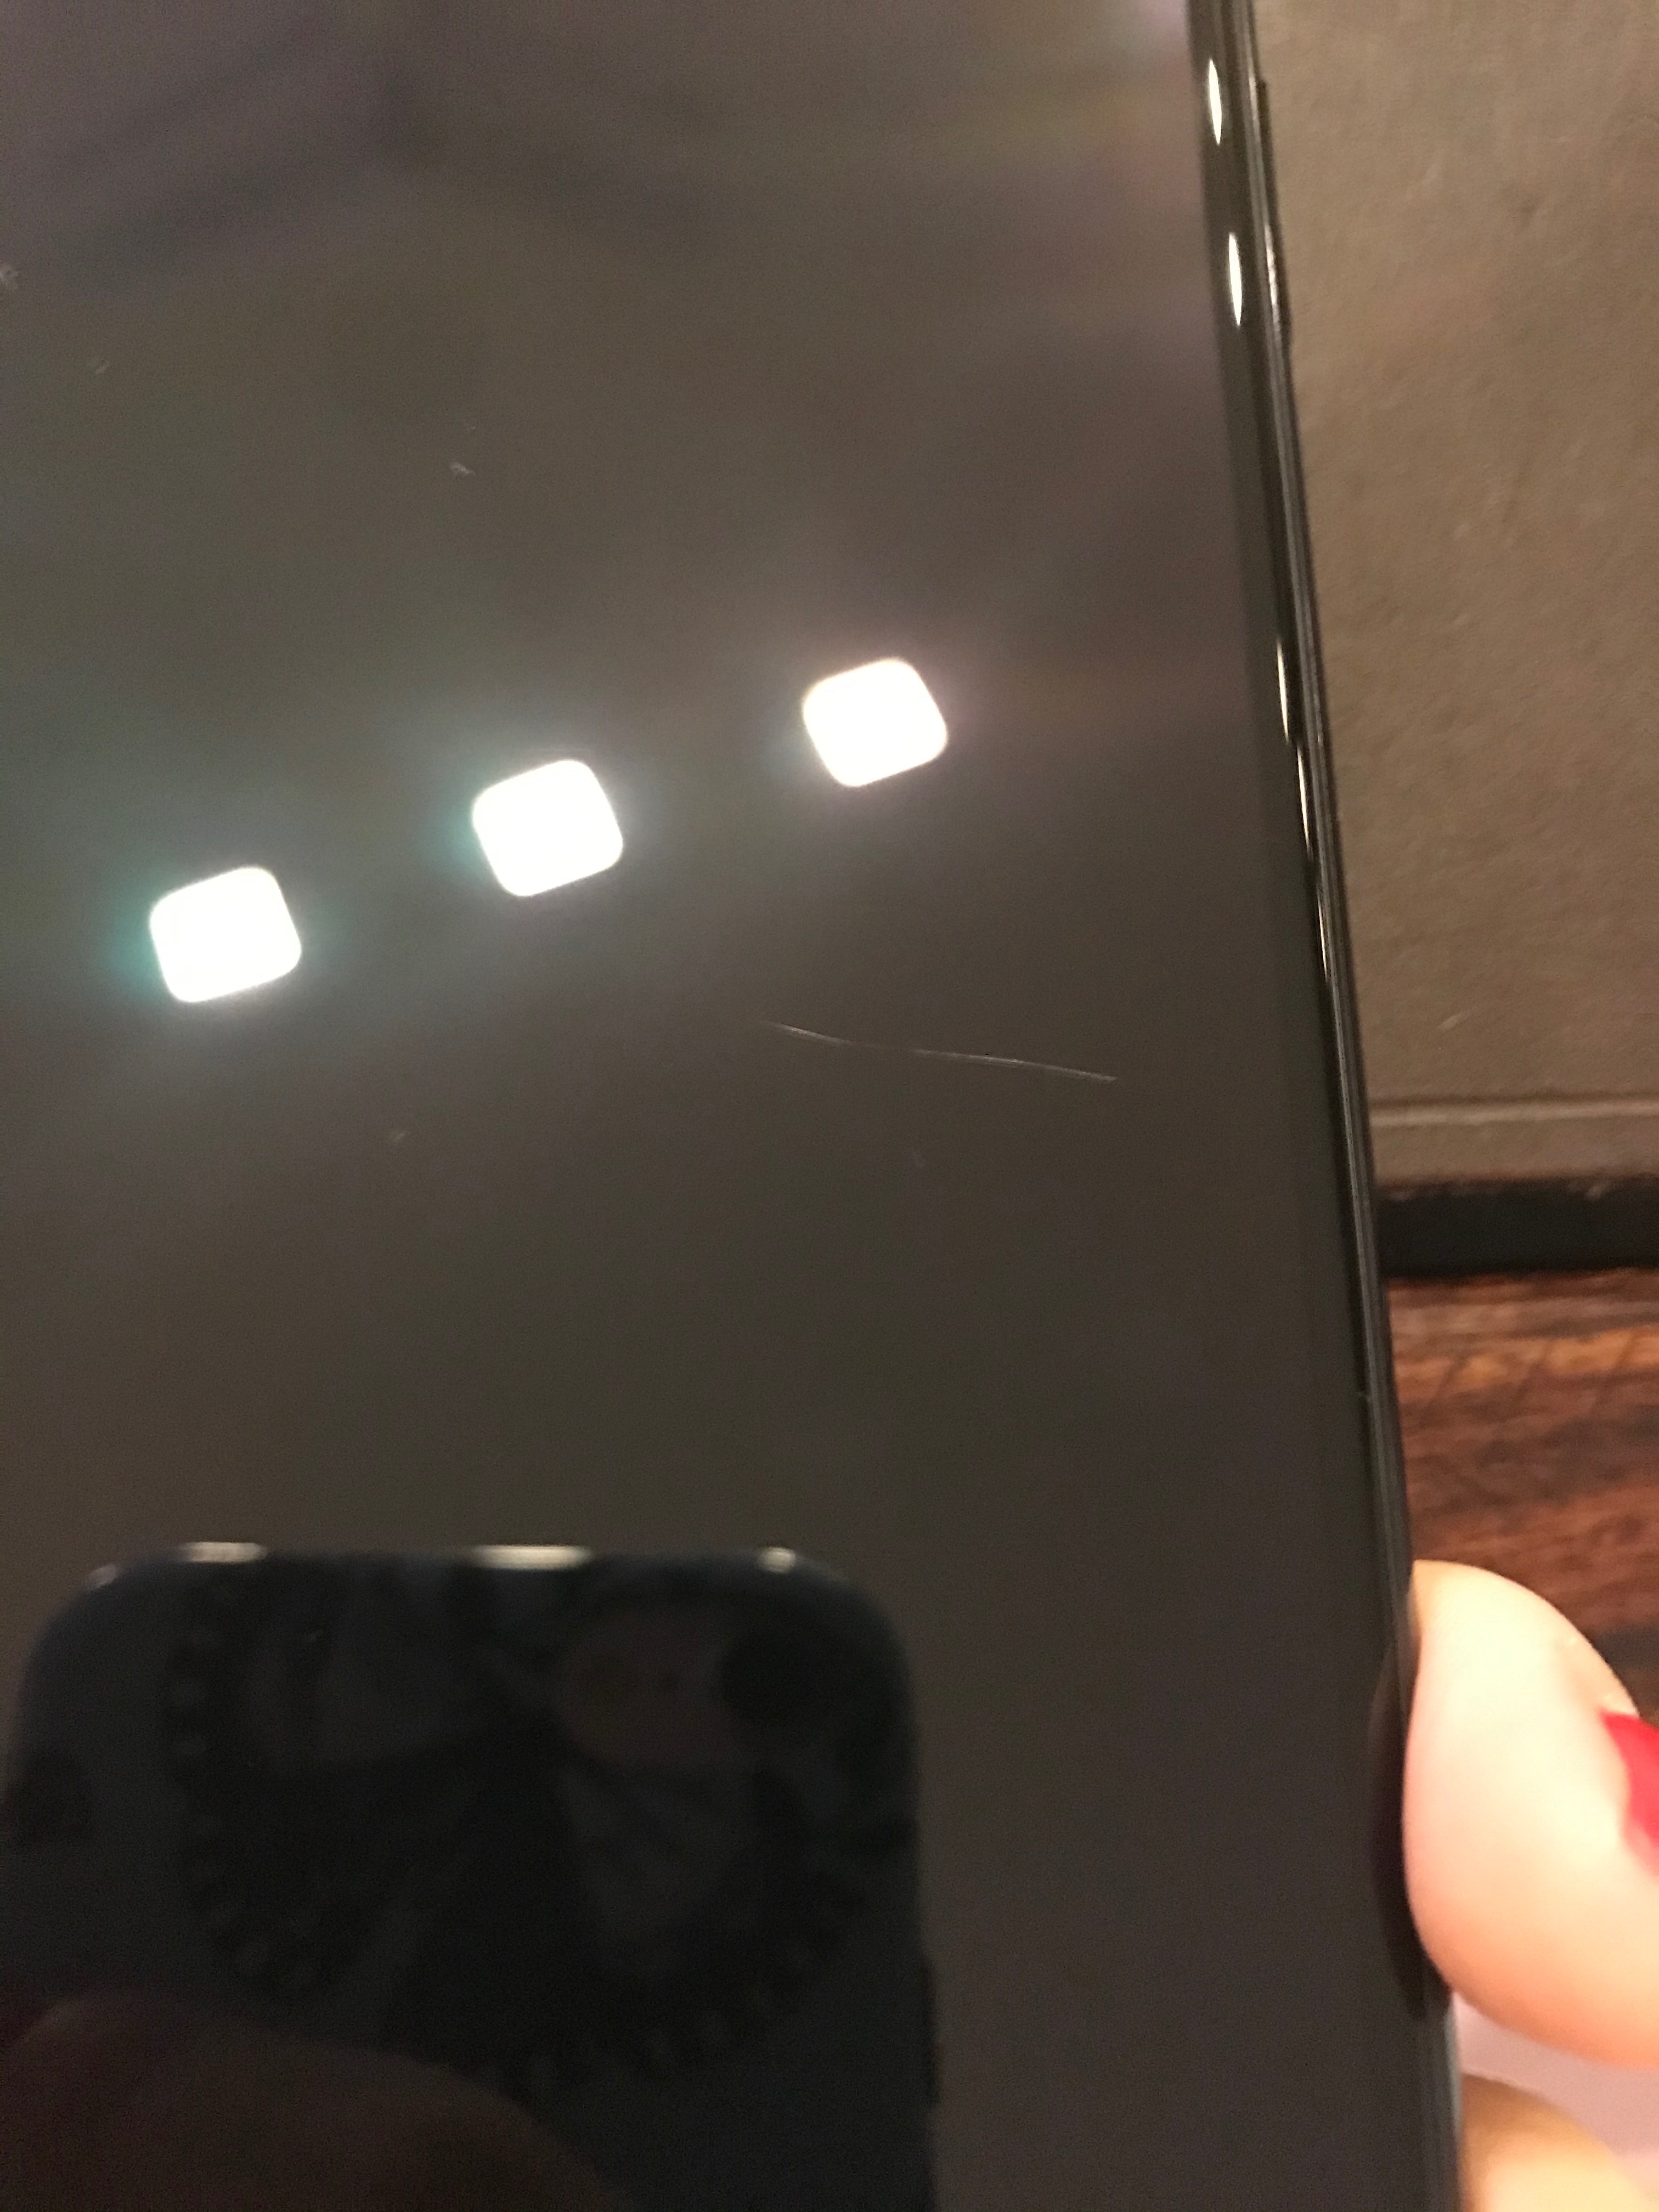 How To Fix Deep Scratches On iPhone Screen